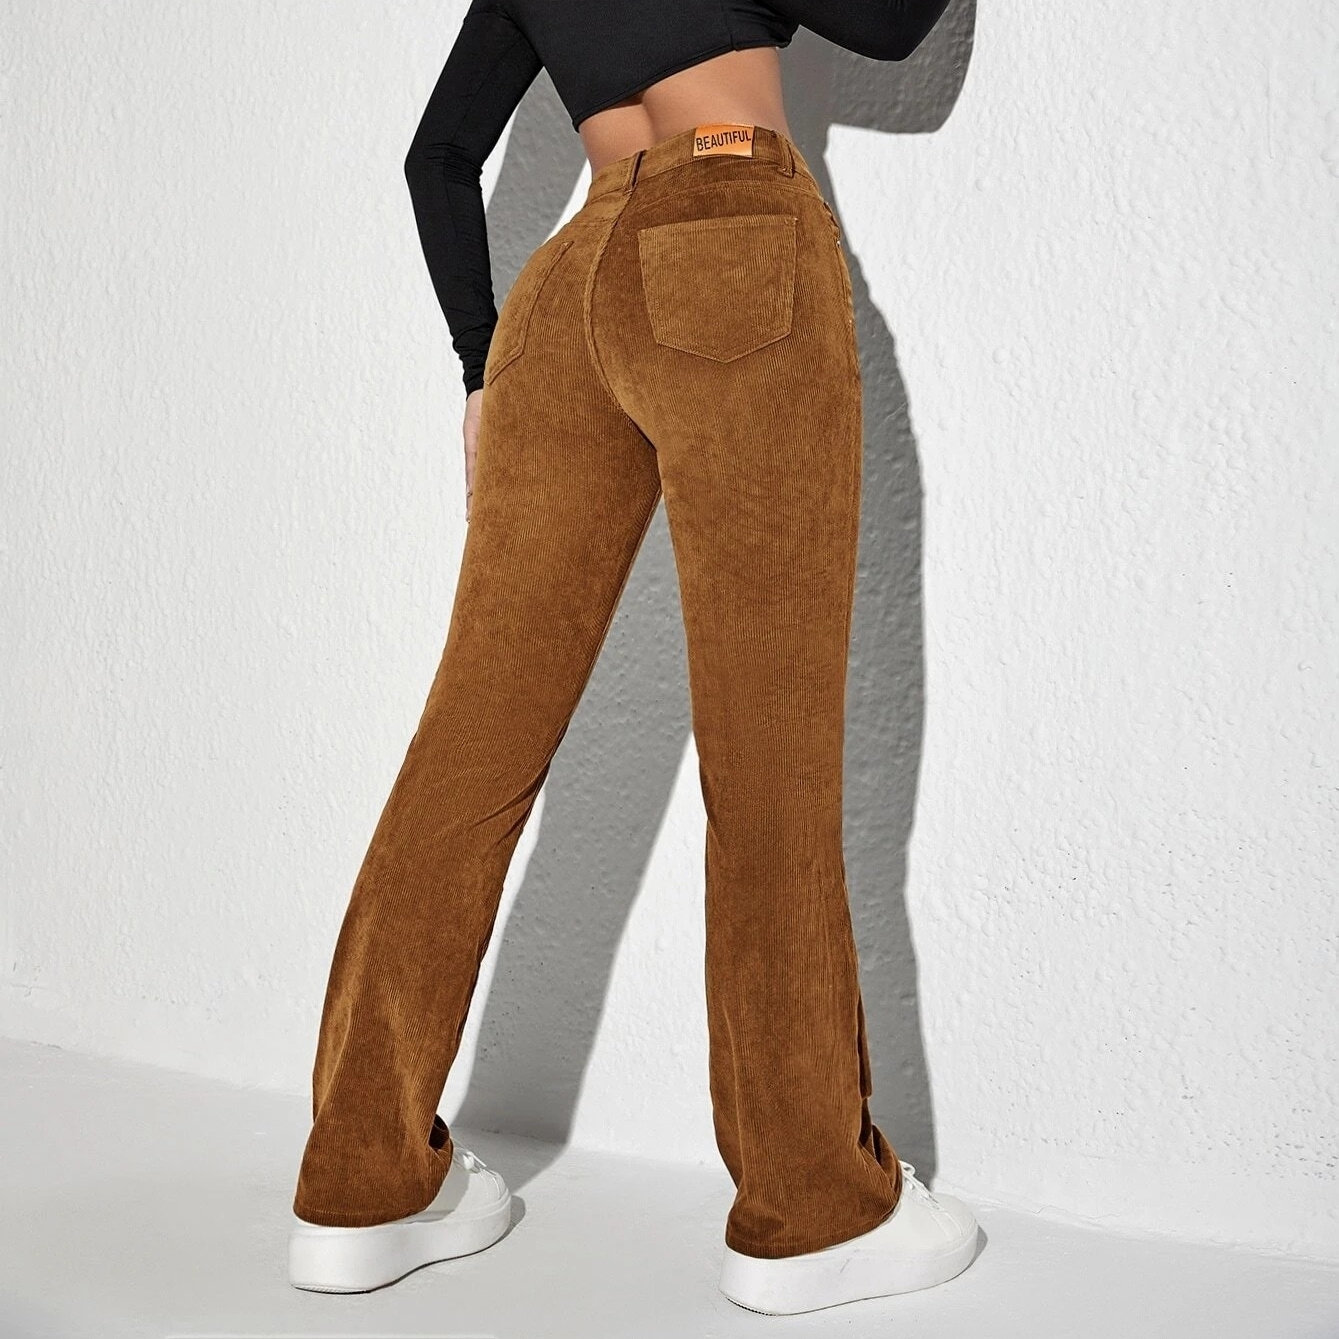 Letter Patched Flare Leg Corduroy Pants - Brown, S